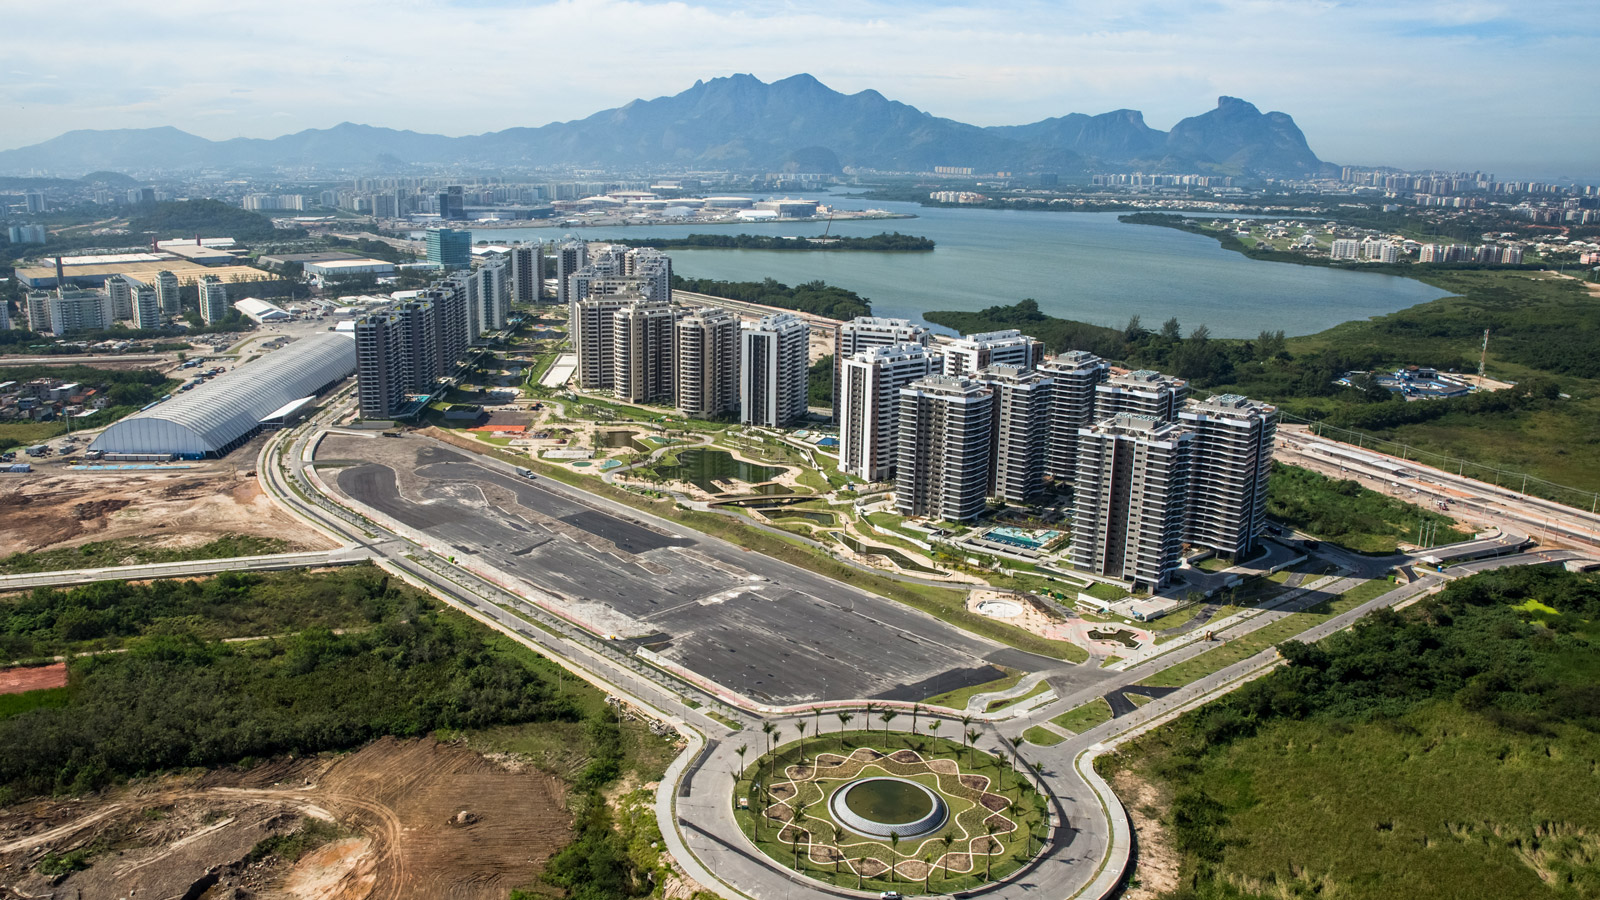 Rio 2016 Athletes Village Unfinished Ahead Of Olympic Games 